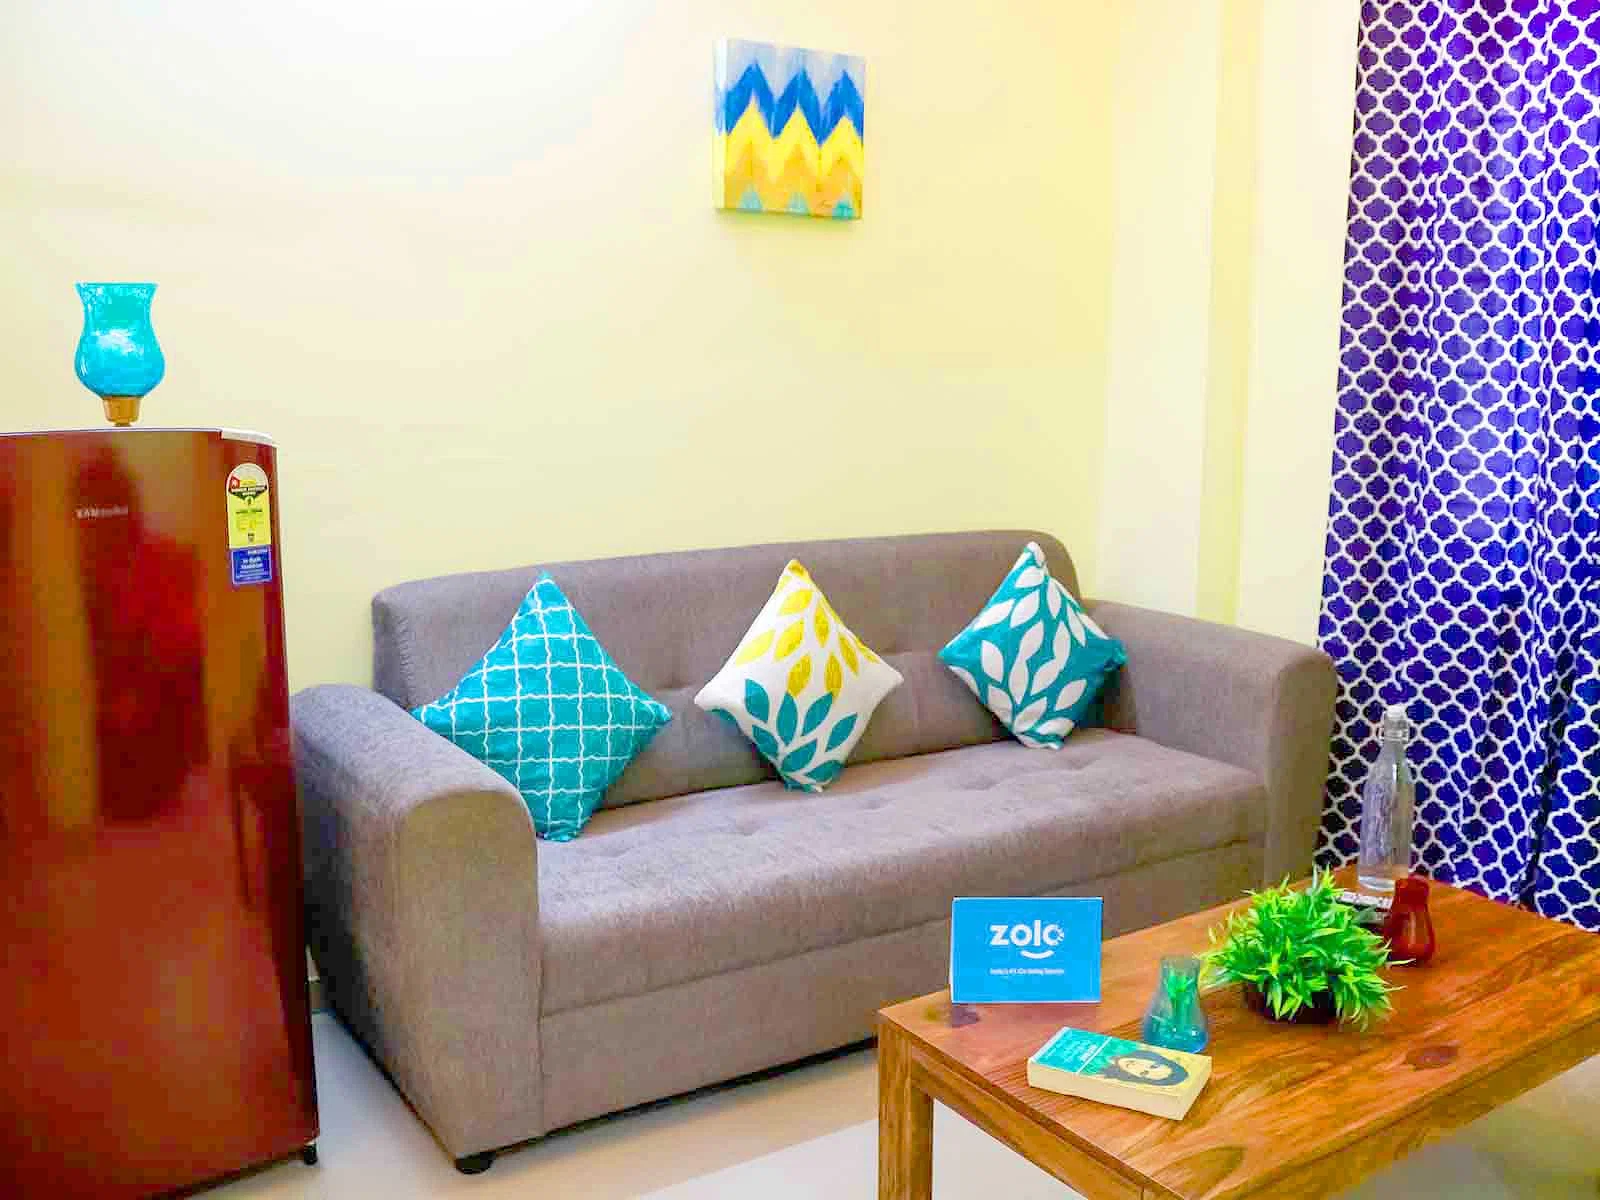 Fully furnished single/sharing rooms for rent in Maruthi Nagar with no brokerage-apply fast-Zolo Ikigai